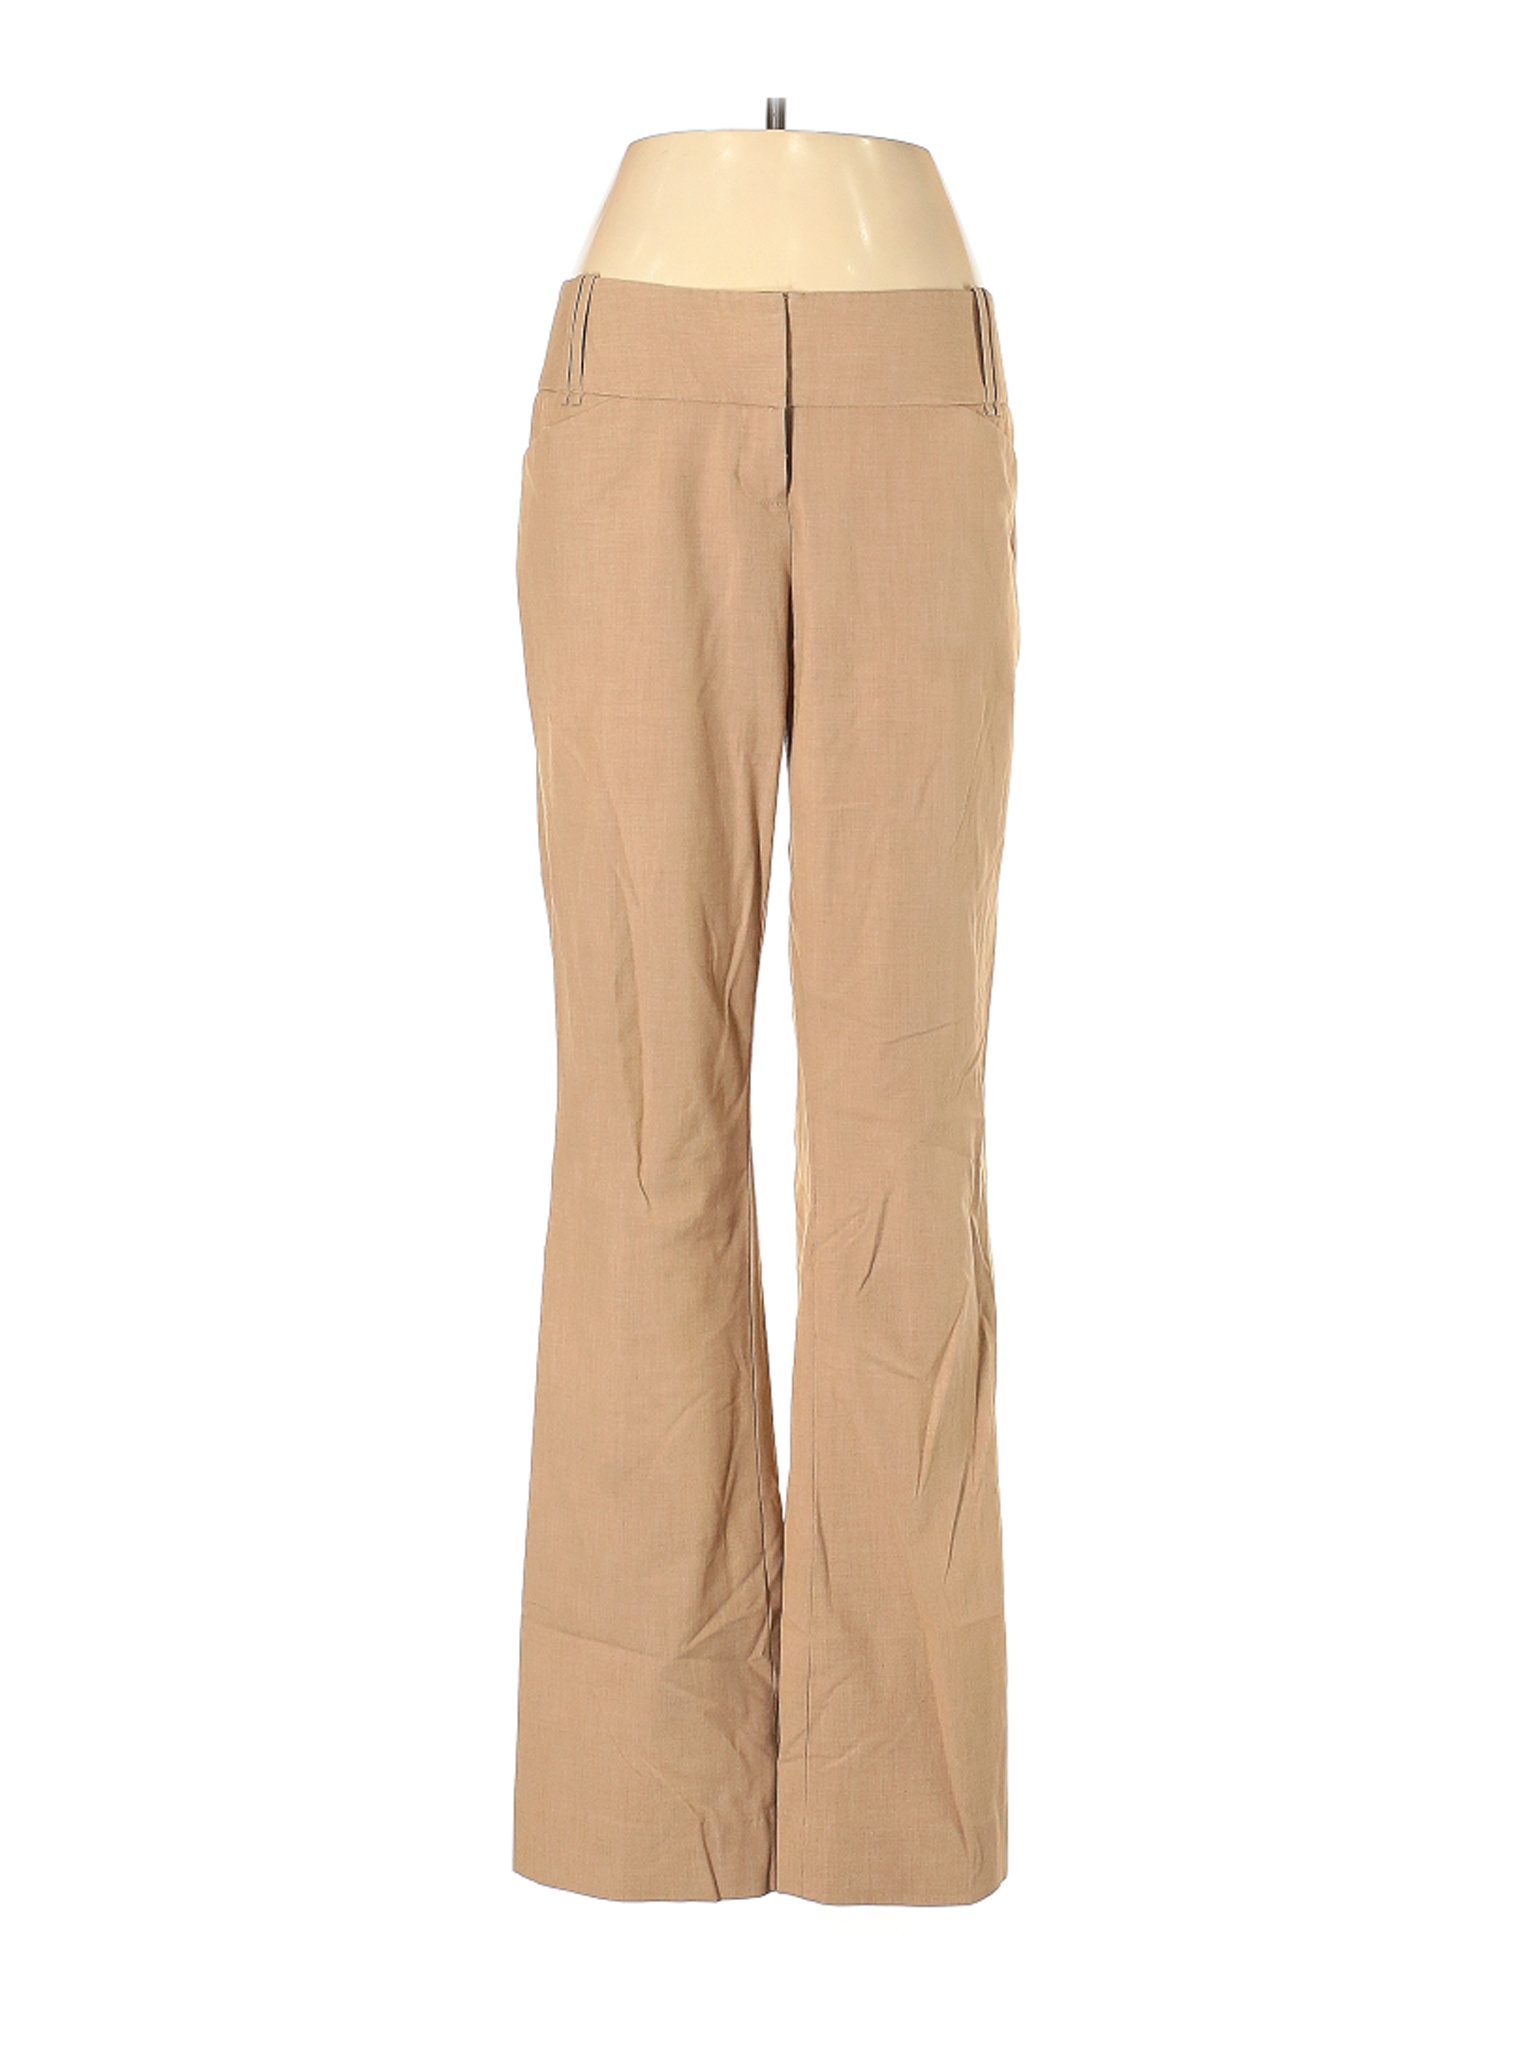 The Limited Women Brown Casual Pants 4 | eBay